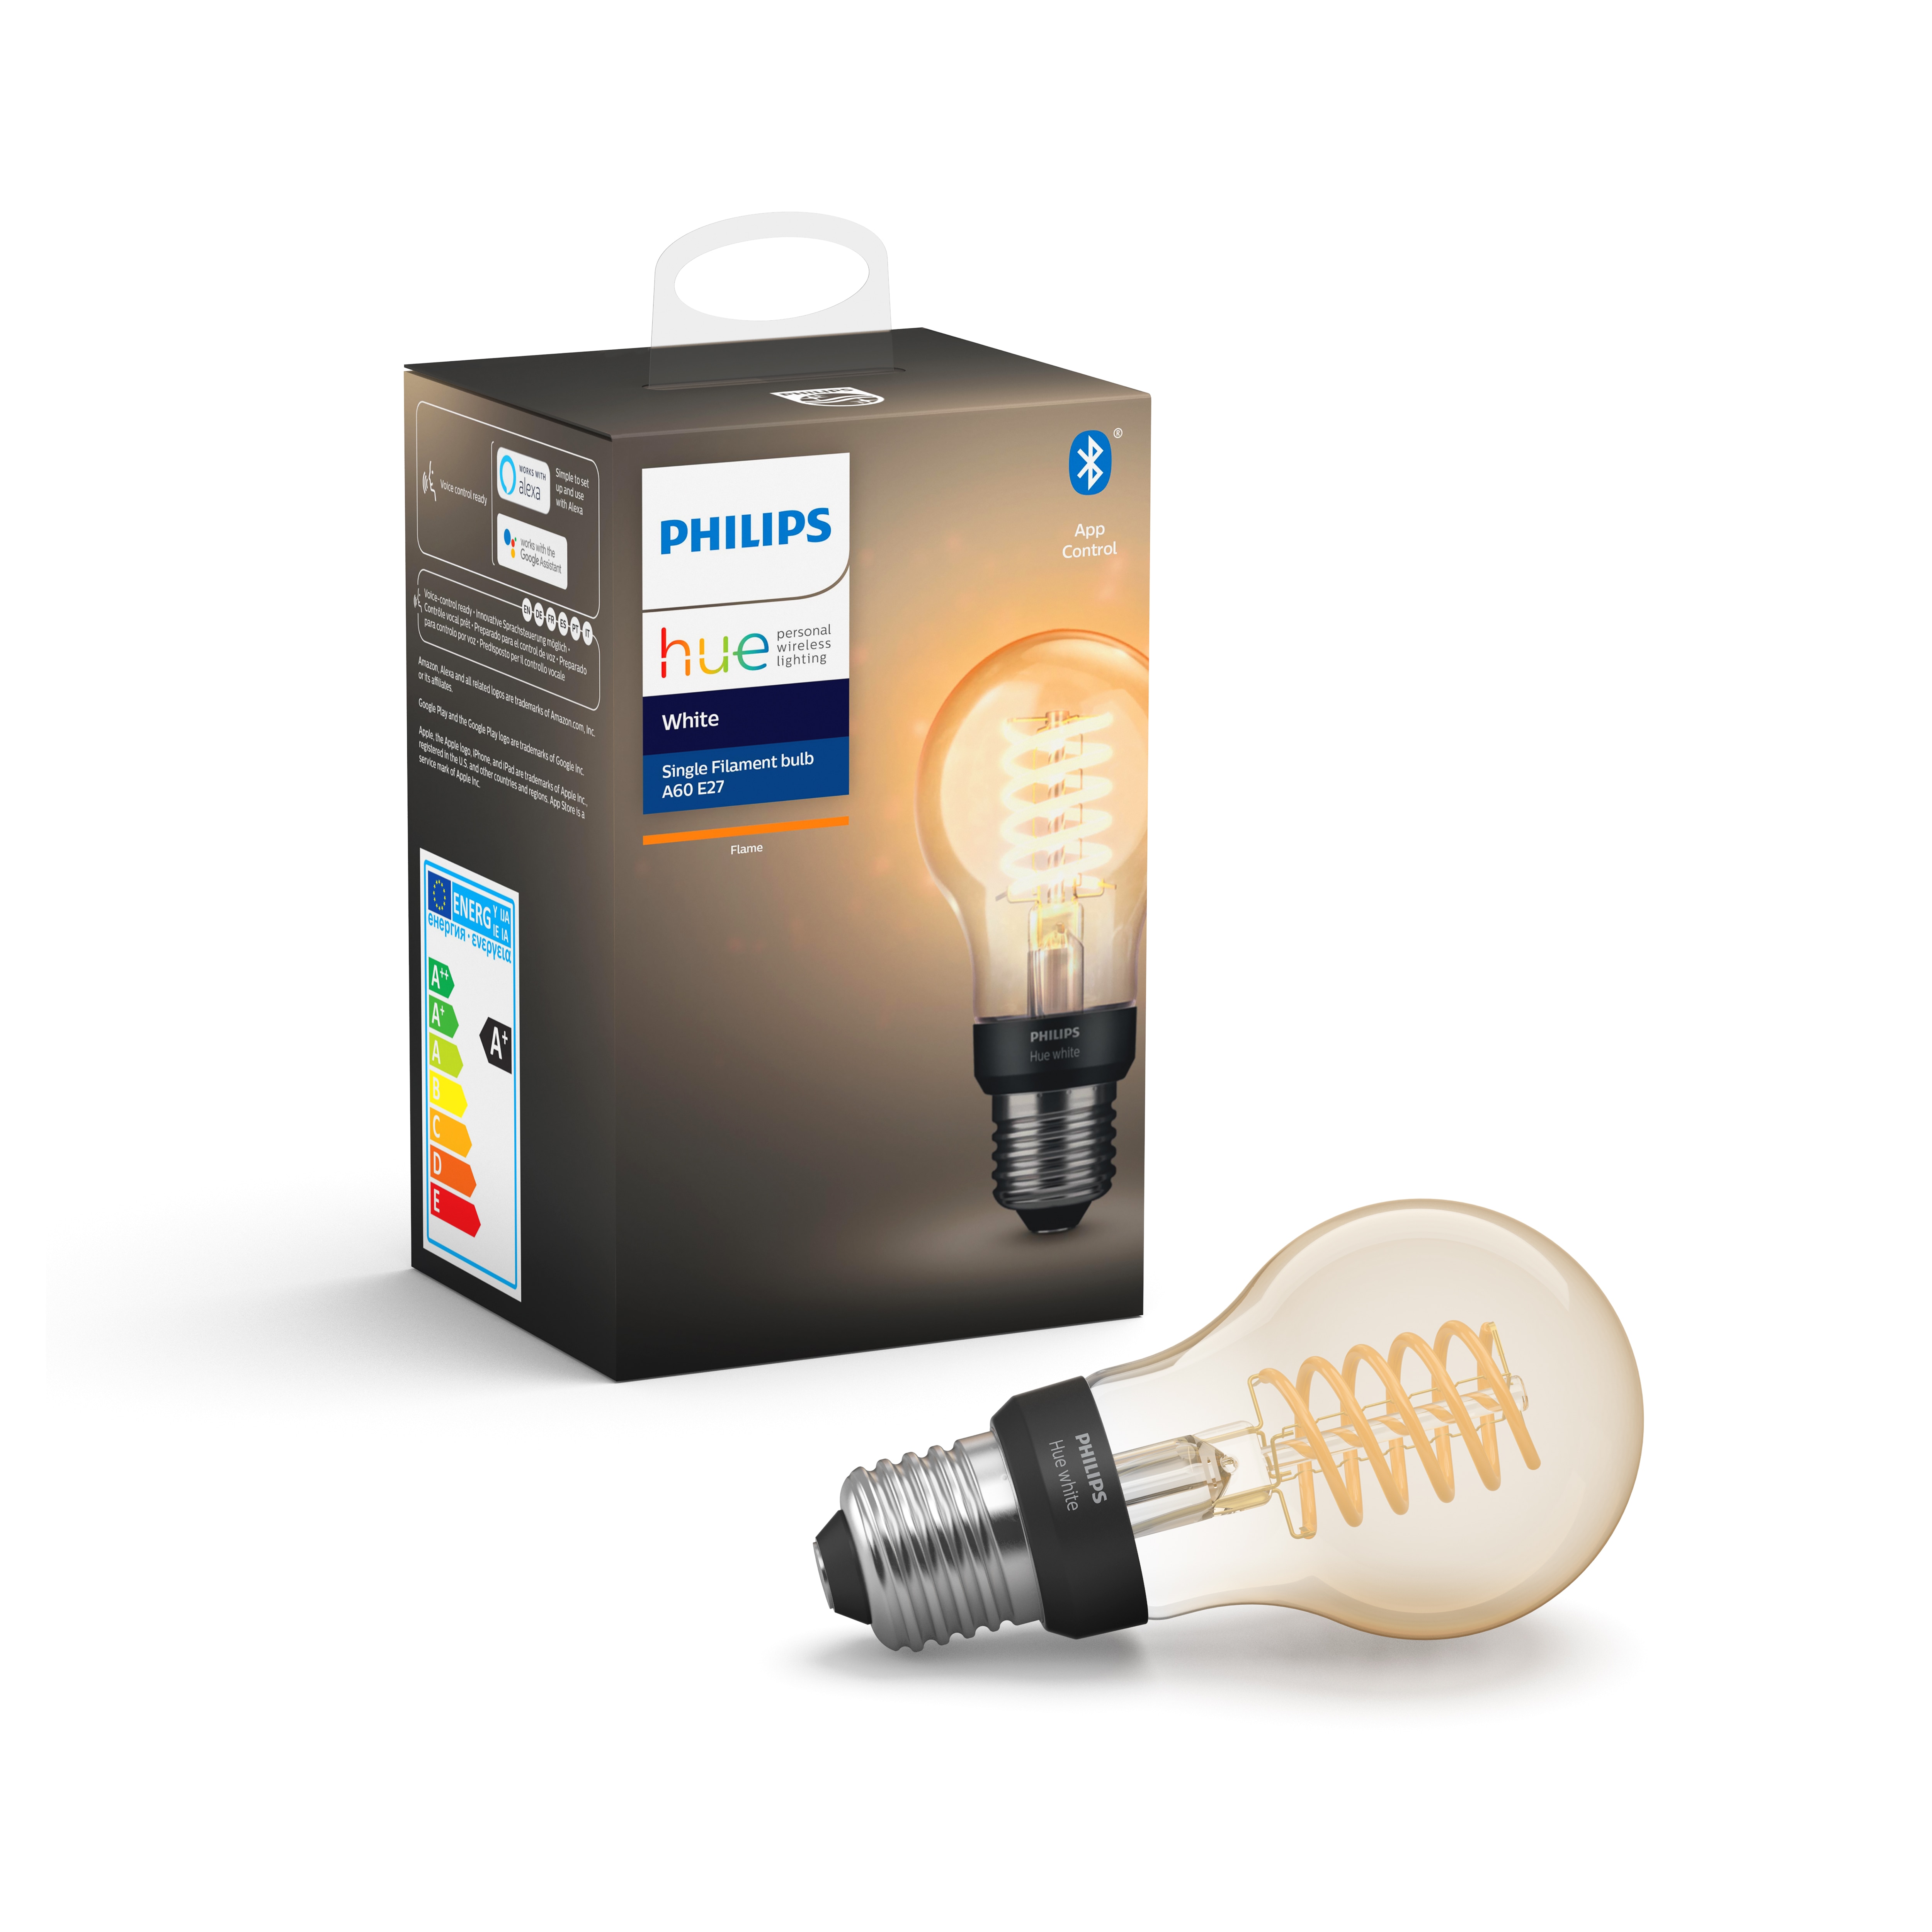 Signify brings its brightest ideas to life with new Philips Hue Filament  bulbs and more | Signify Company Website